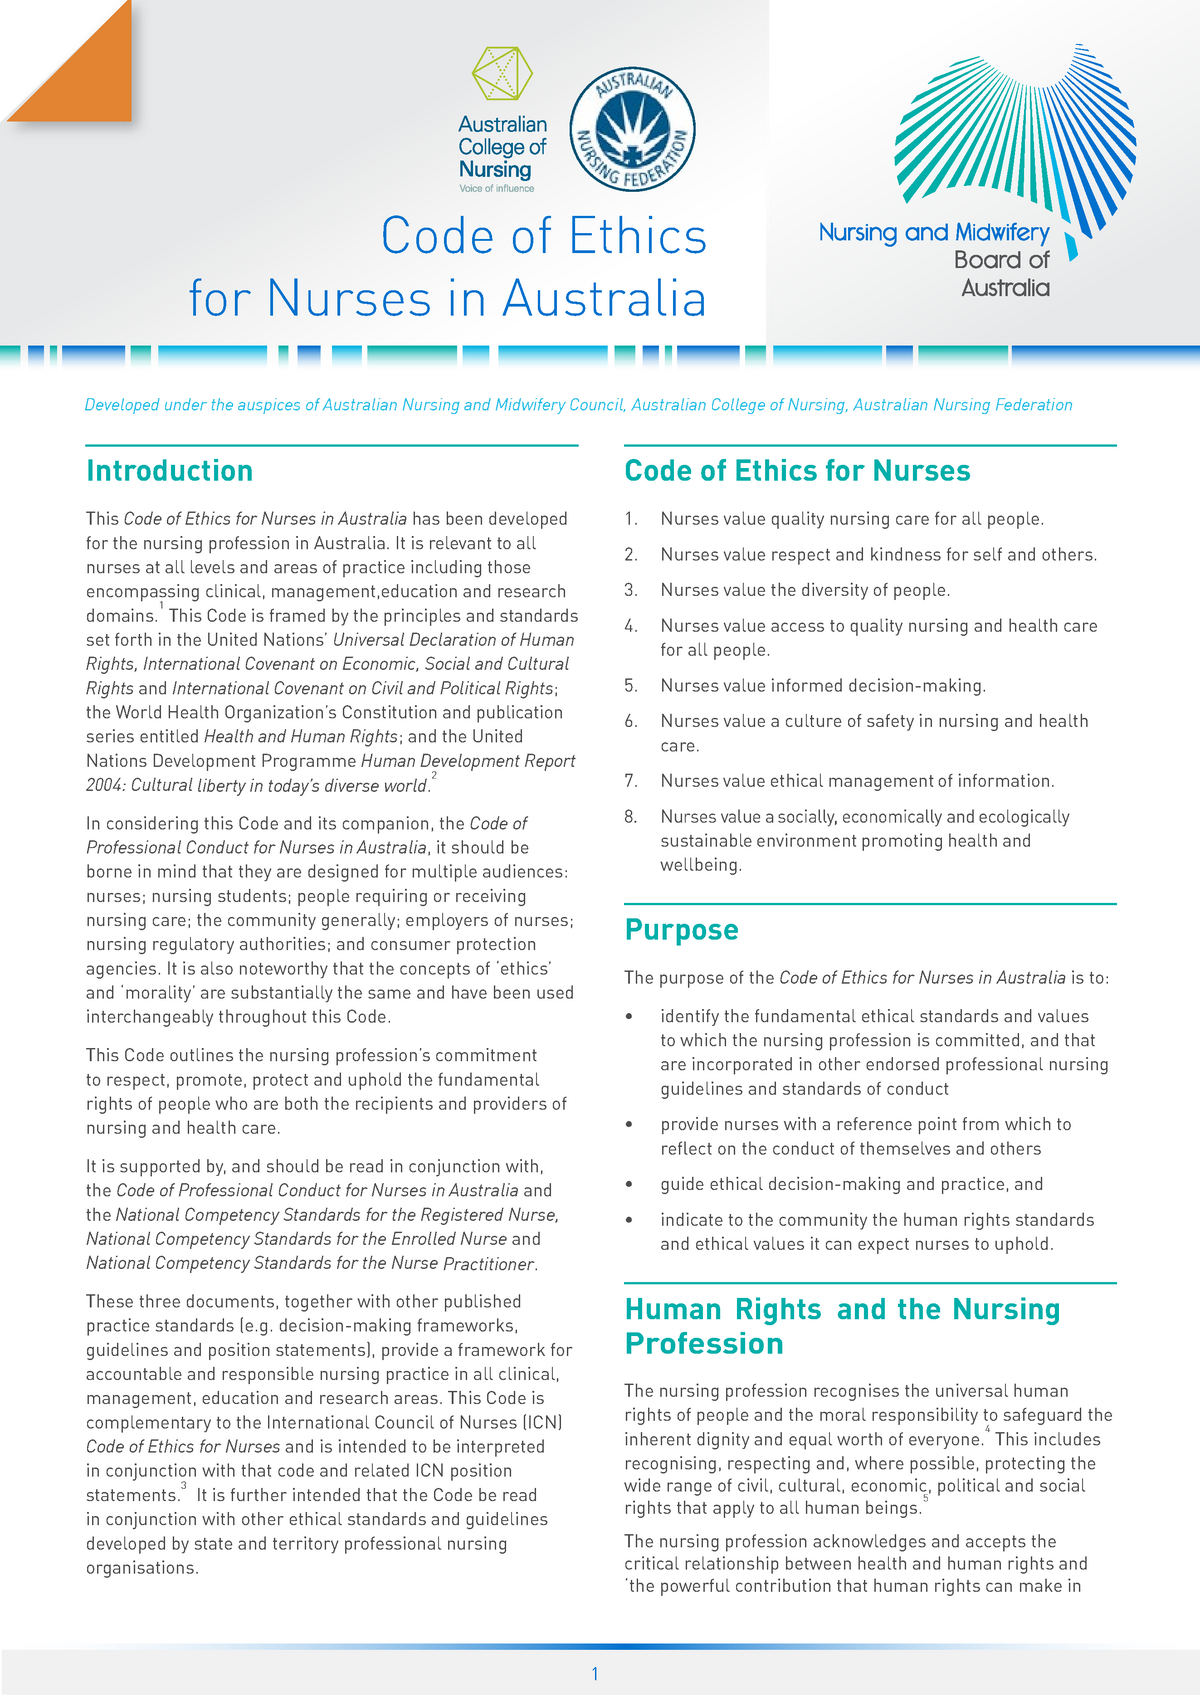 Nursing Philosophy and Code of Ethics